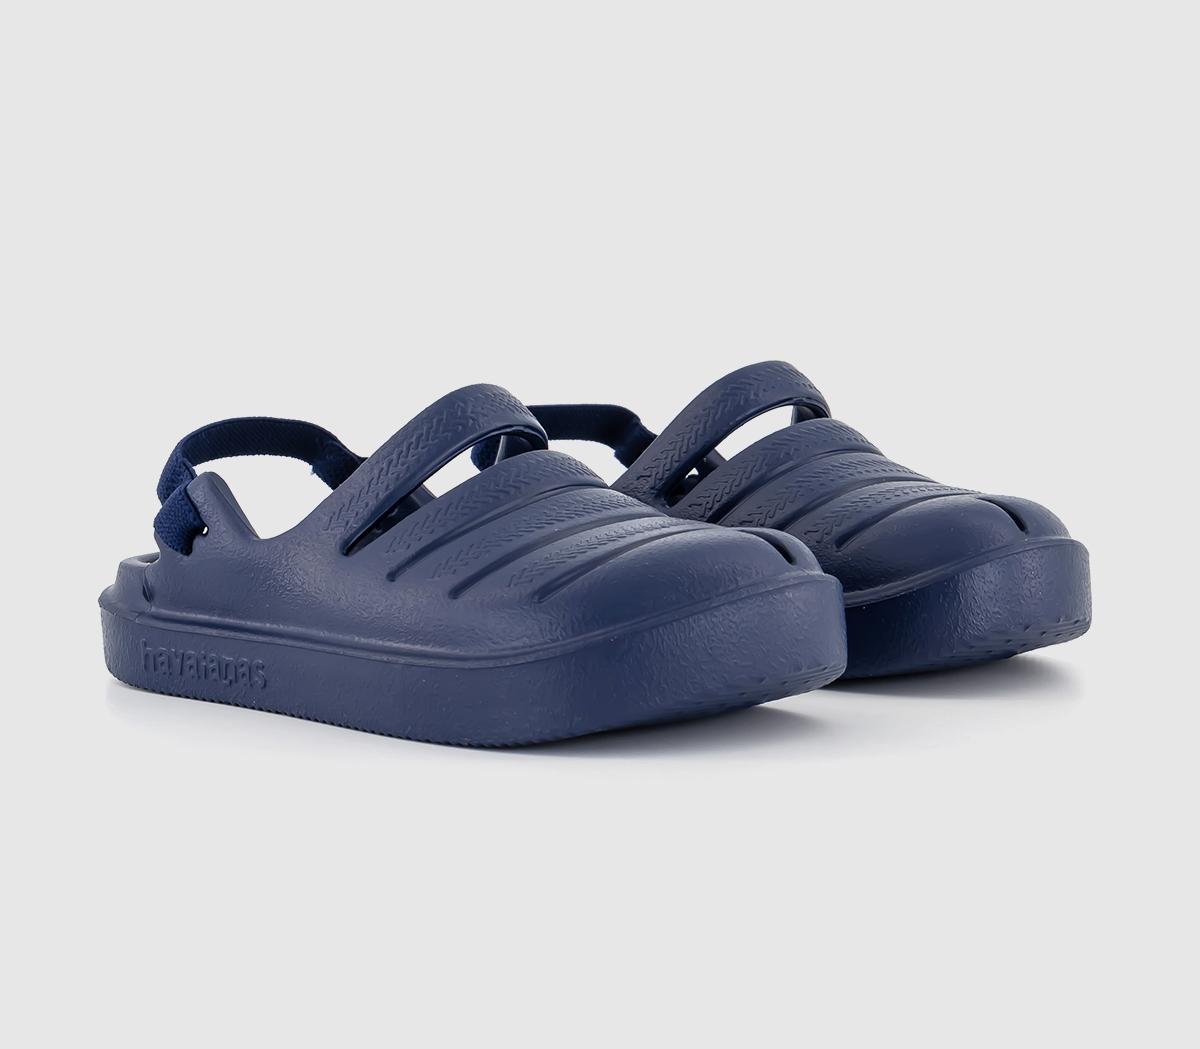 Havaianas Kids Baby Clogs Navy Blue, 9infant